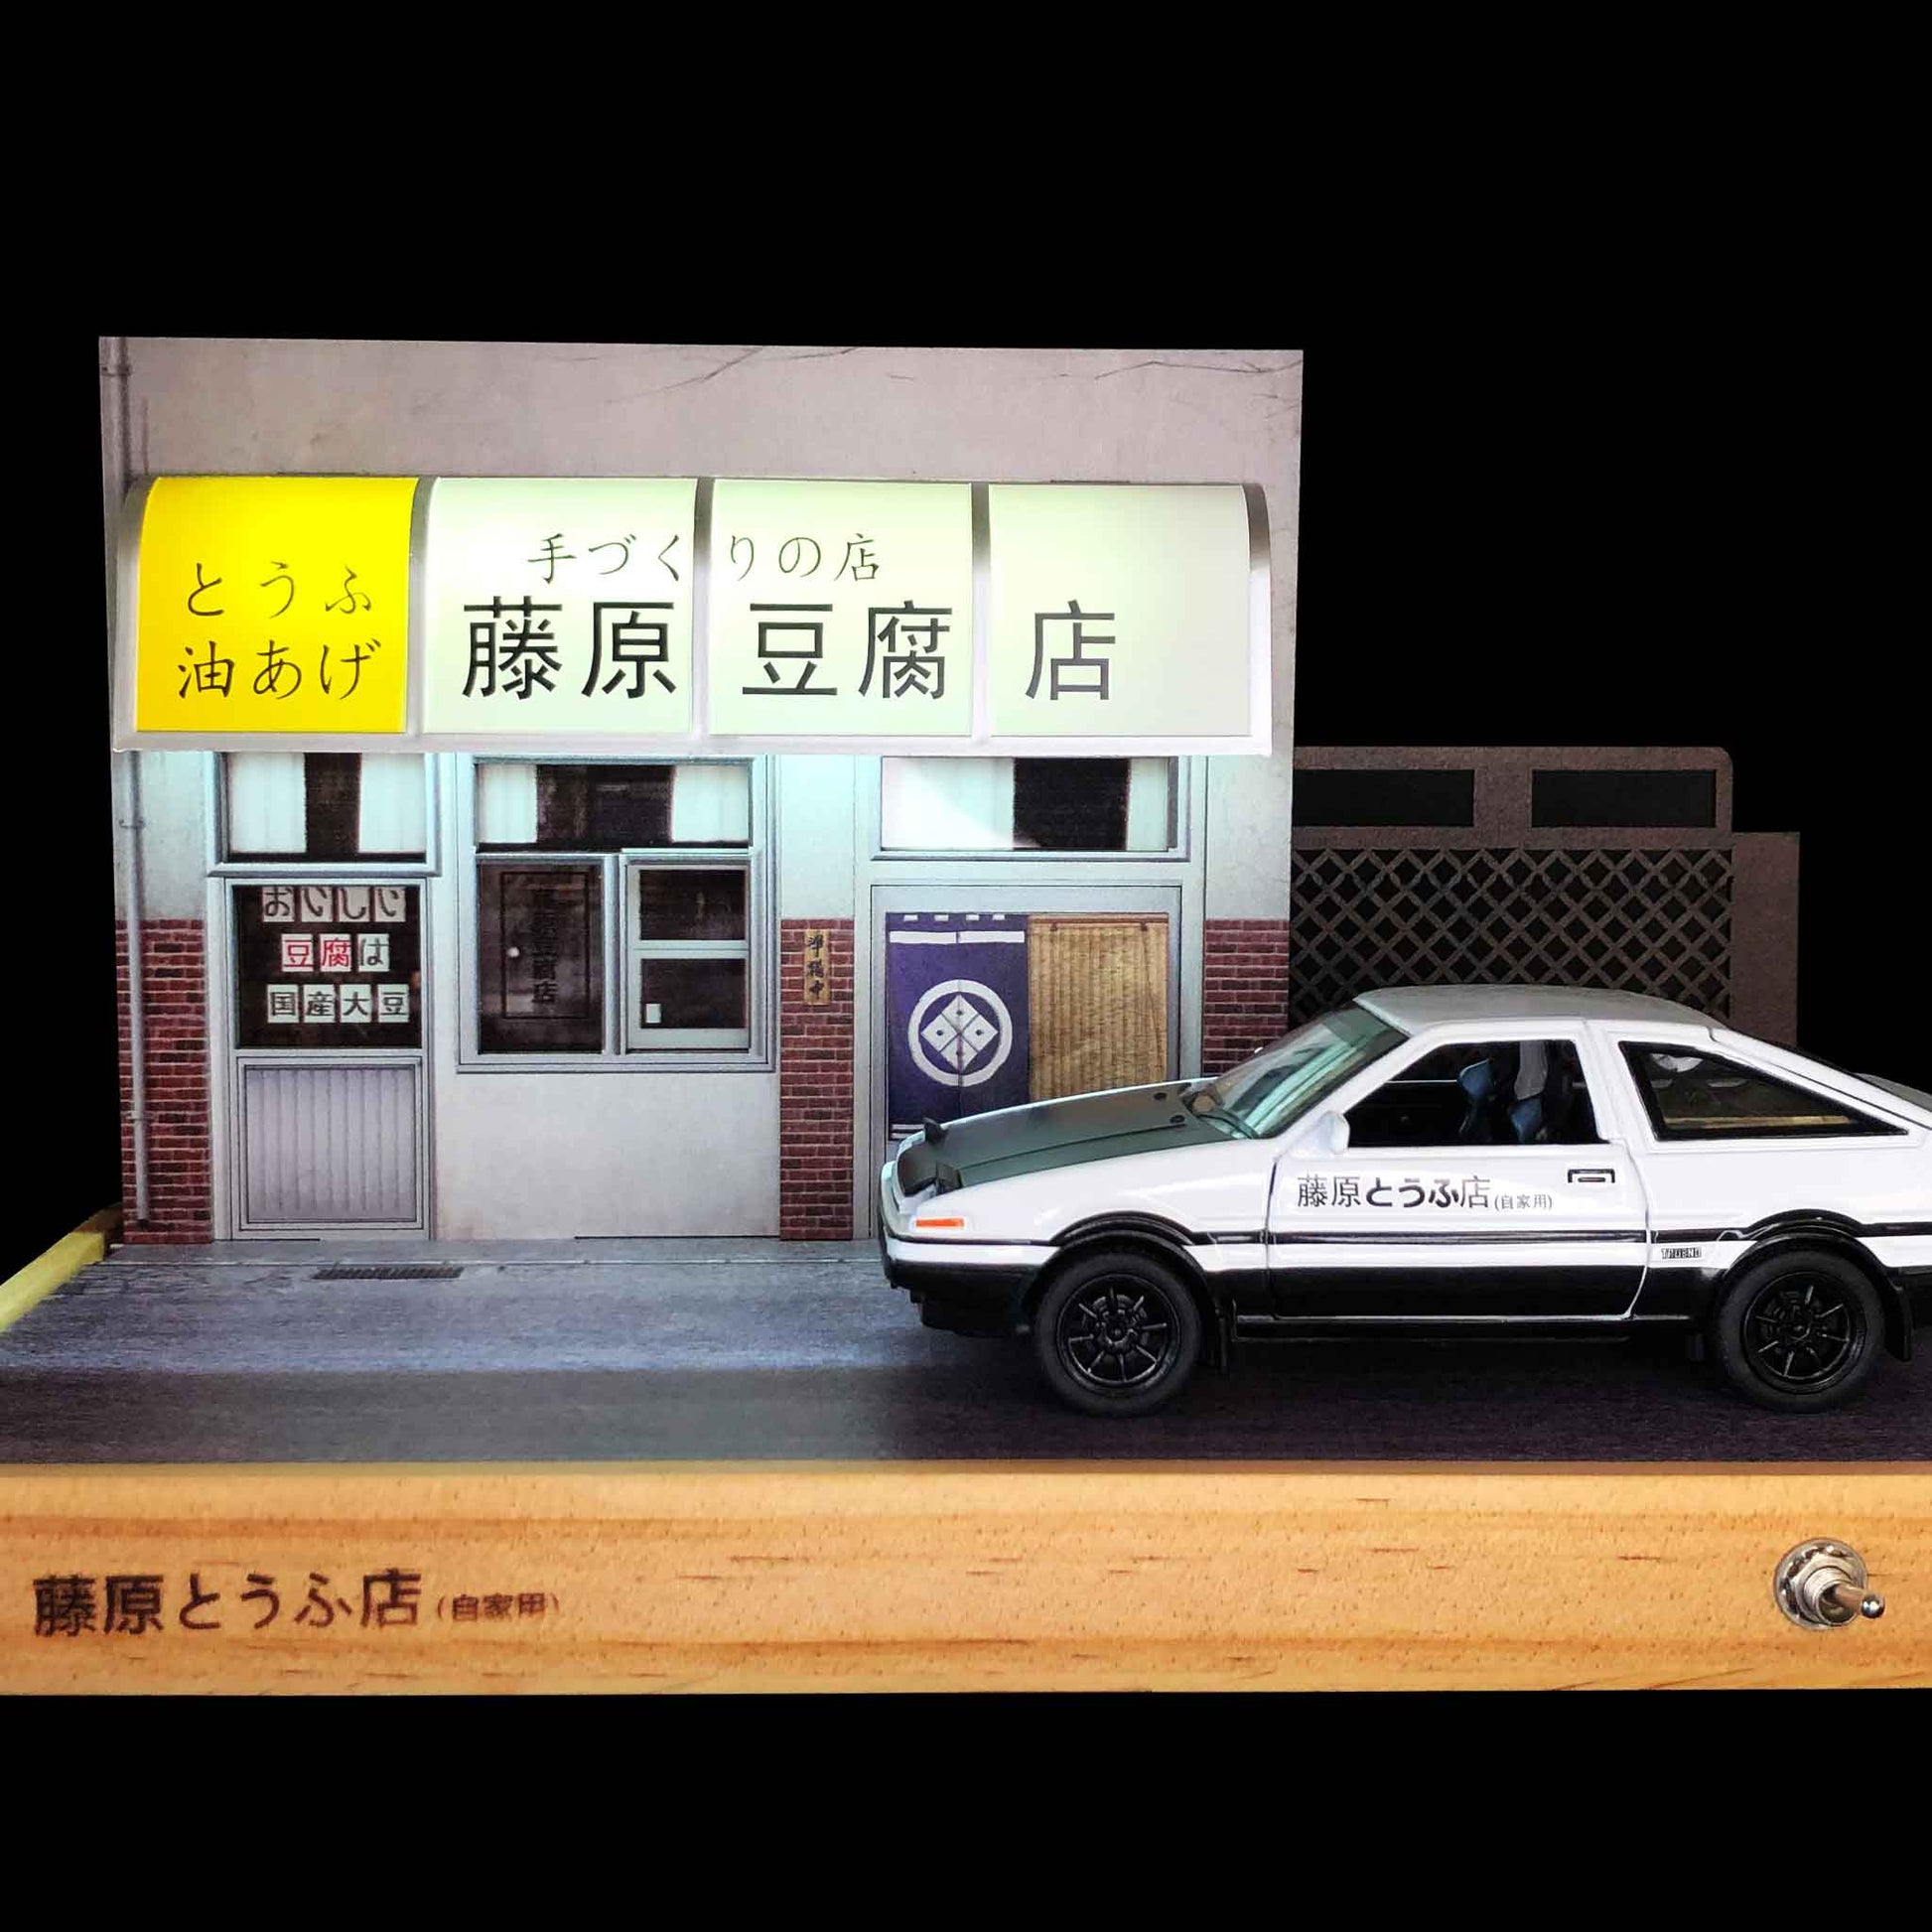 Front of a Fujiwara tofu shop and side of an AE86 car model both on a wooden base